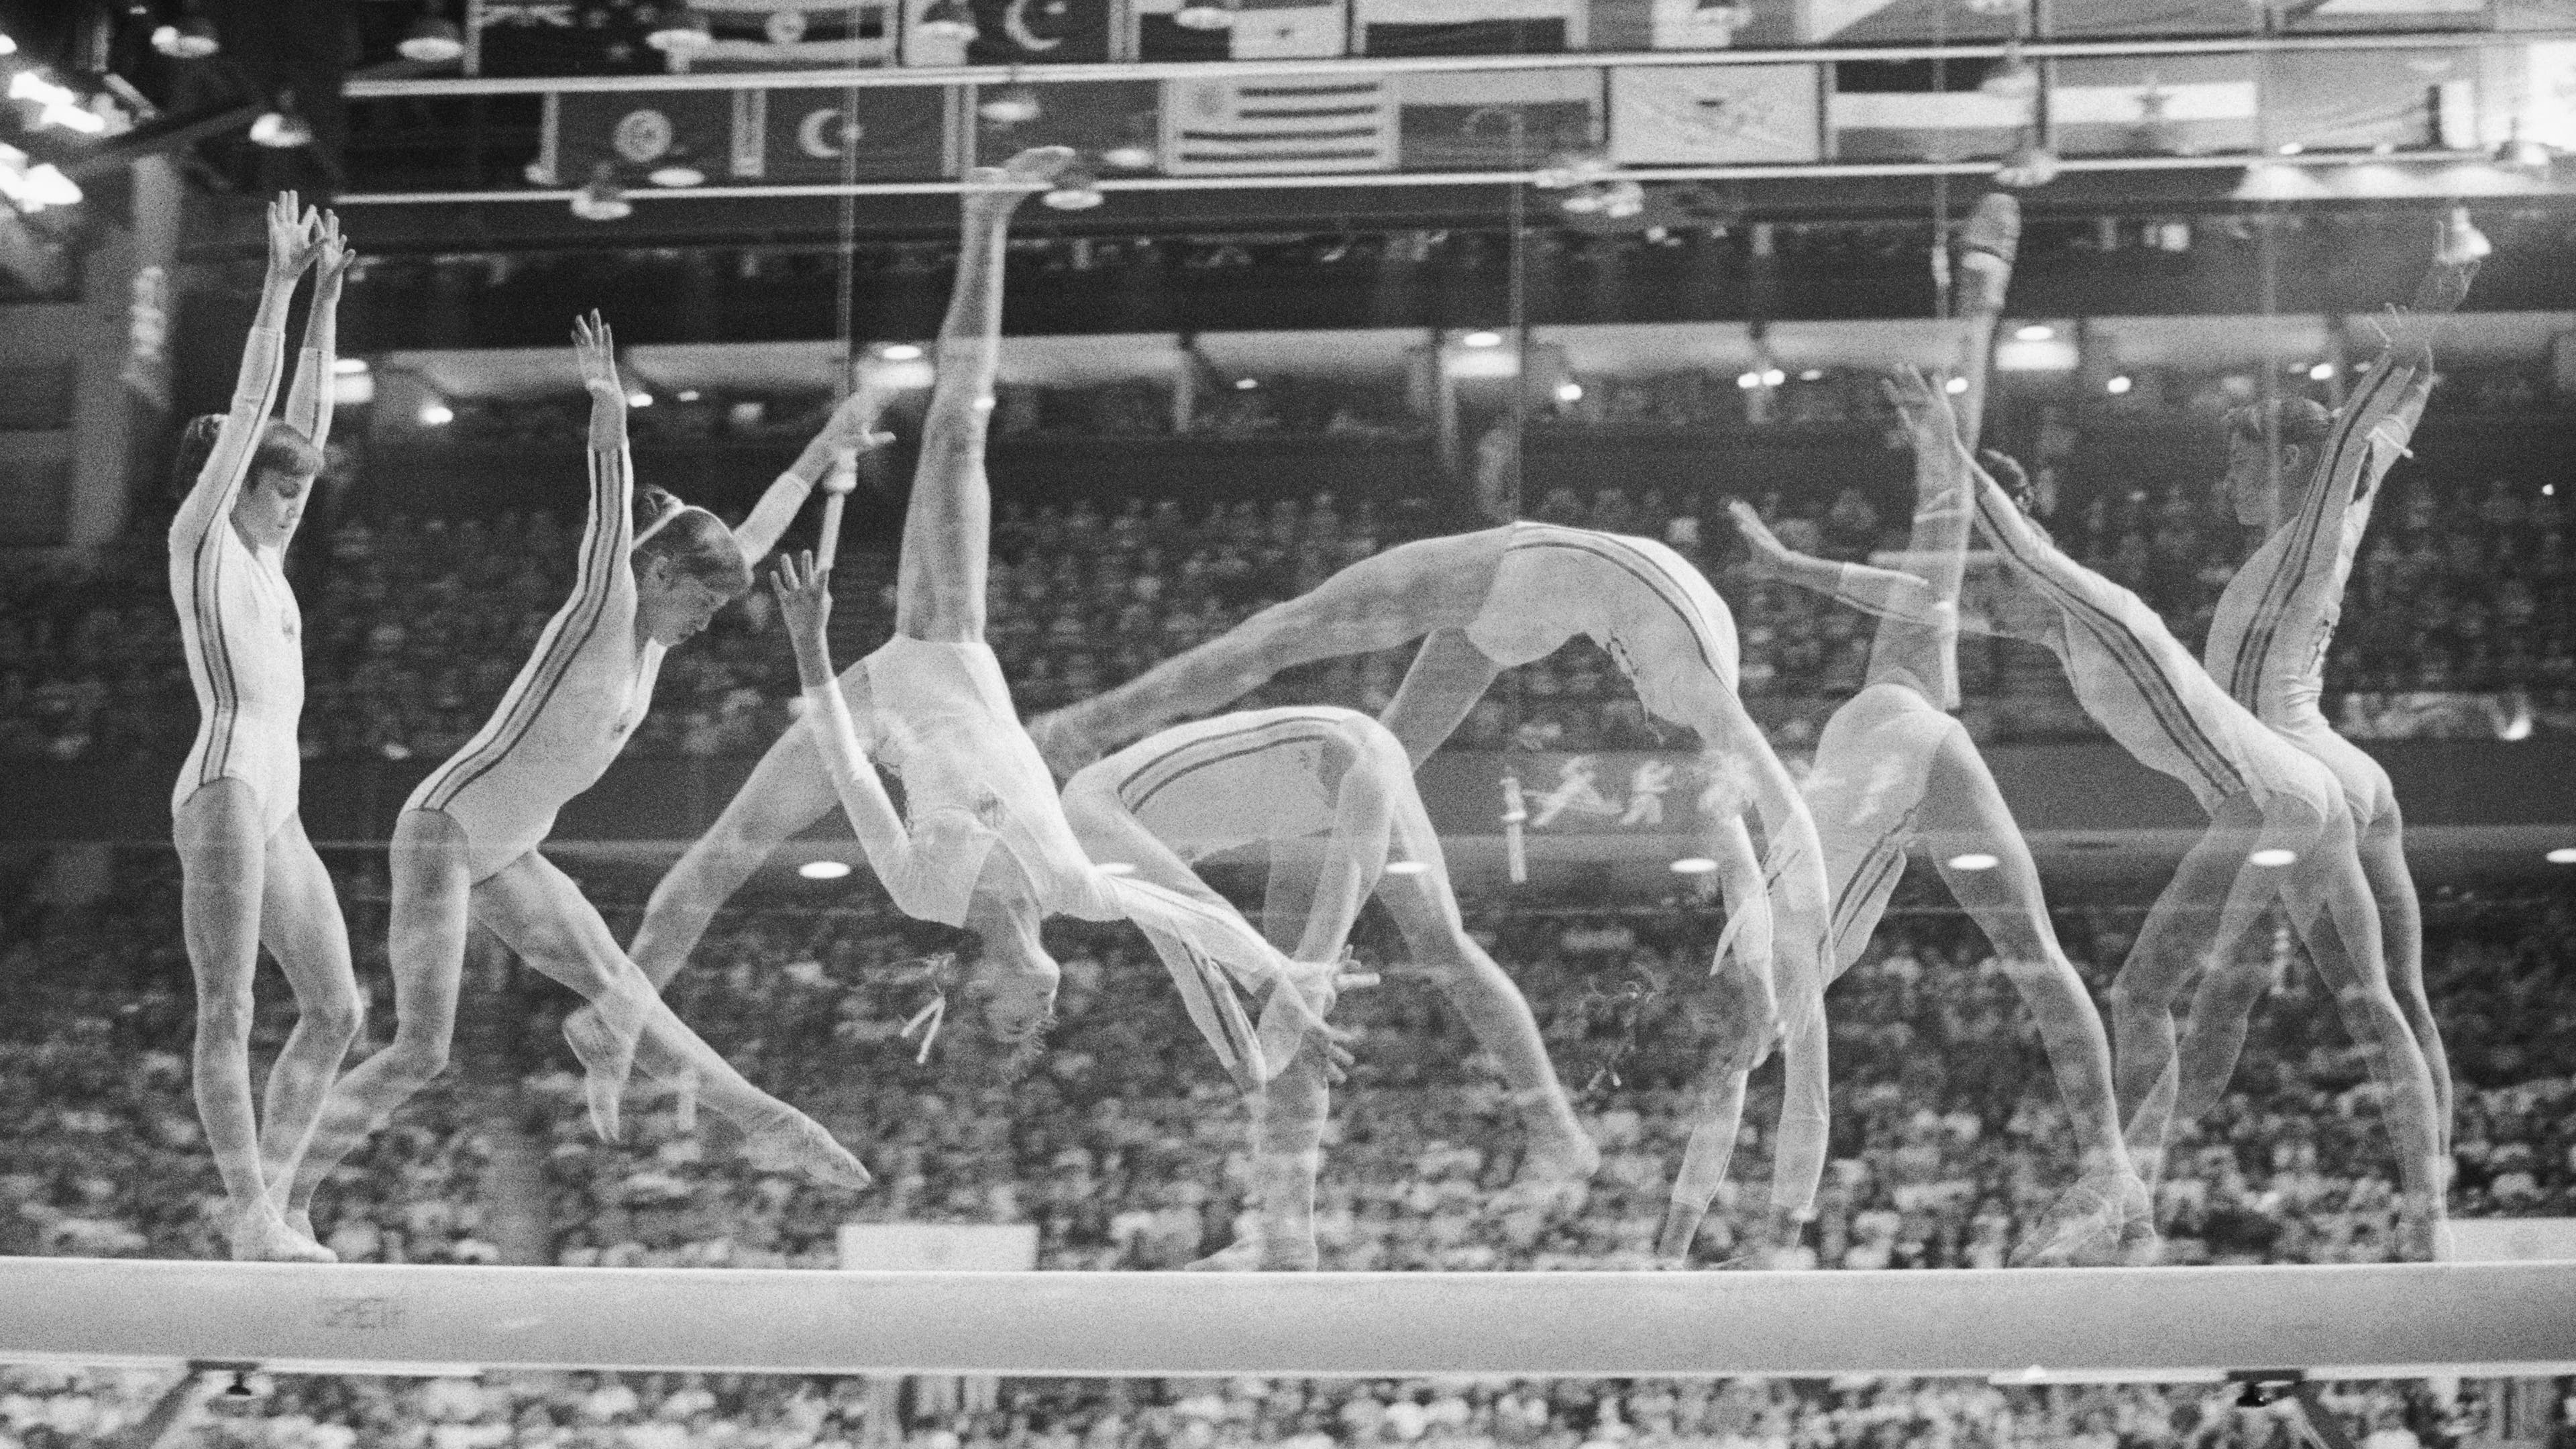 Romania's Nadia Comaneci on the balance beam at the Summer Olympics in 1976.